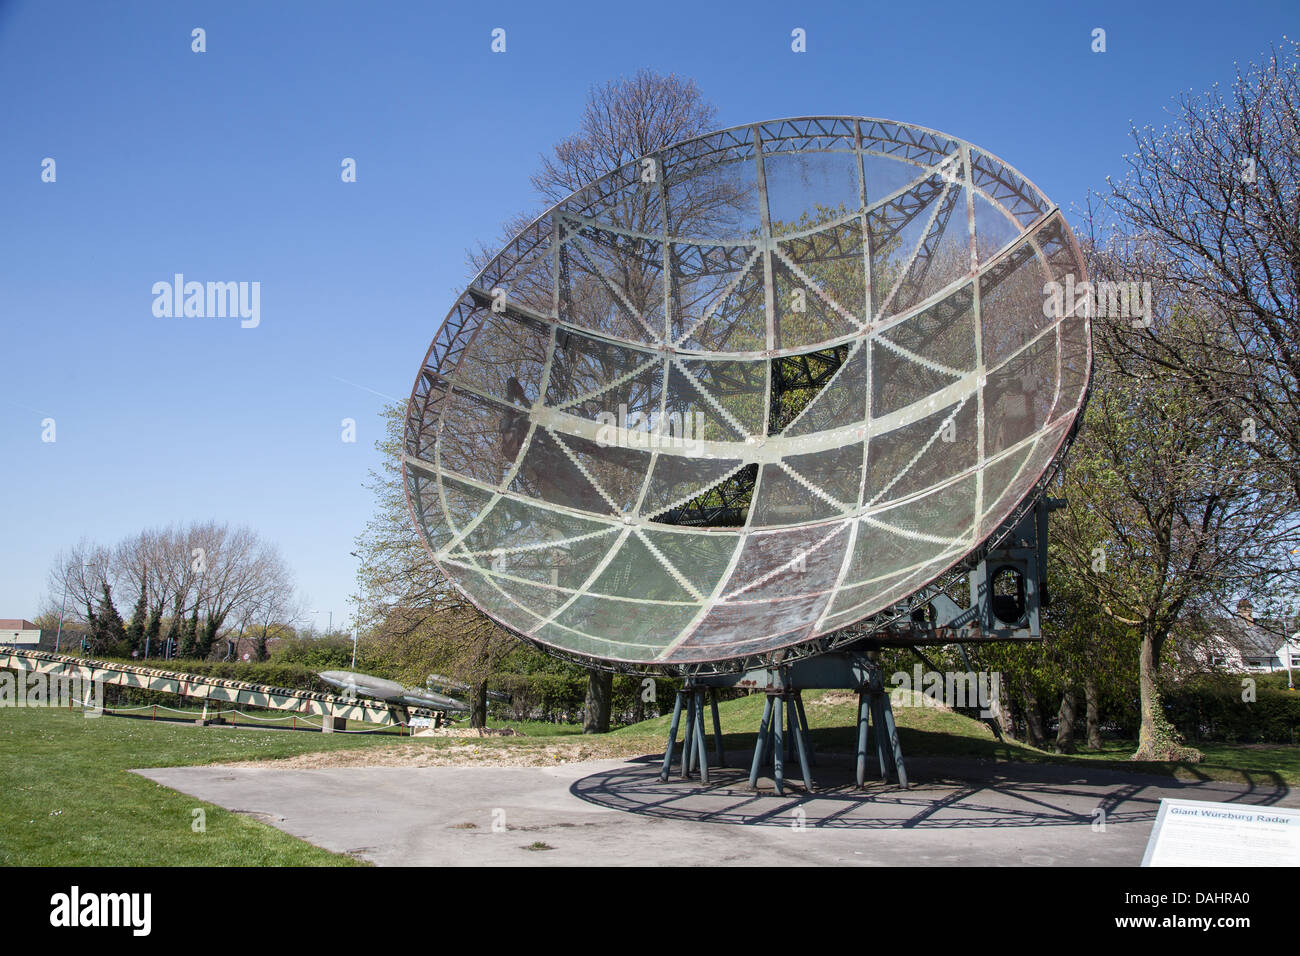 Wurzberg radar dish, used by Germany during the second world war. Now preserved at Duxford Stock Photo